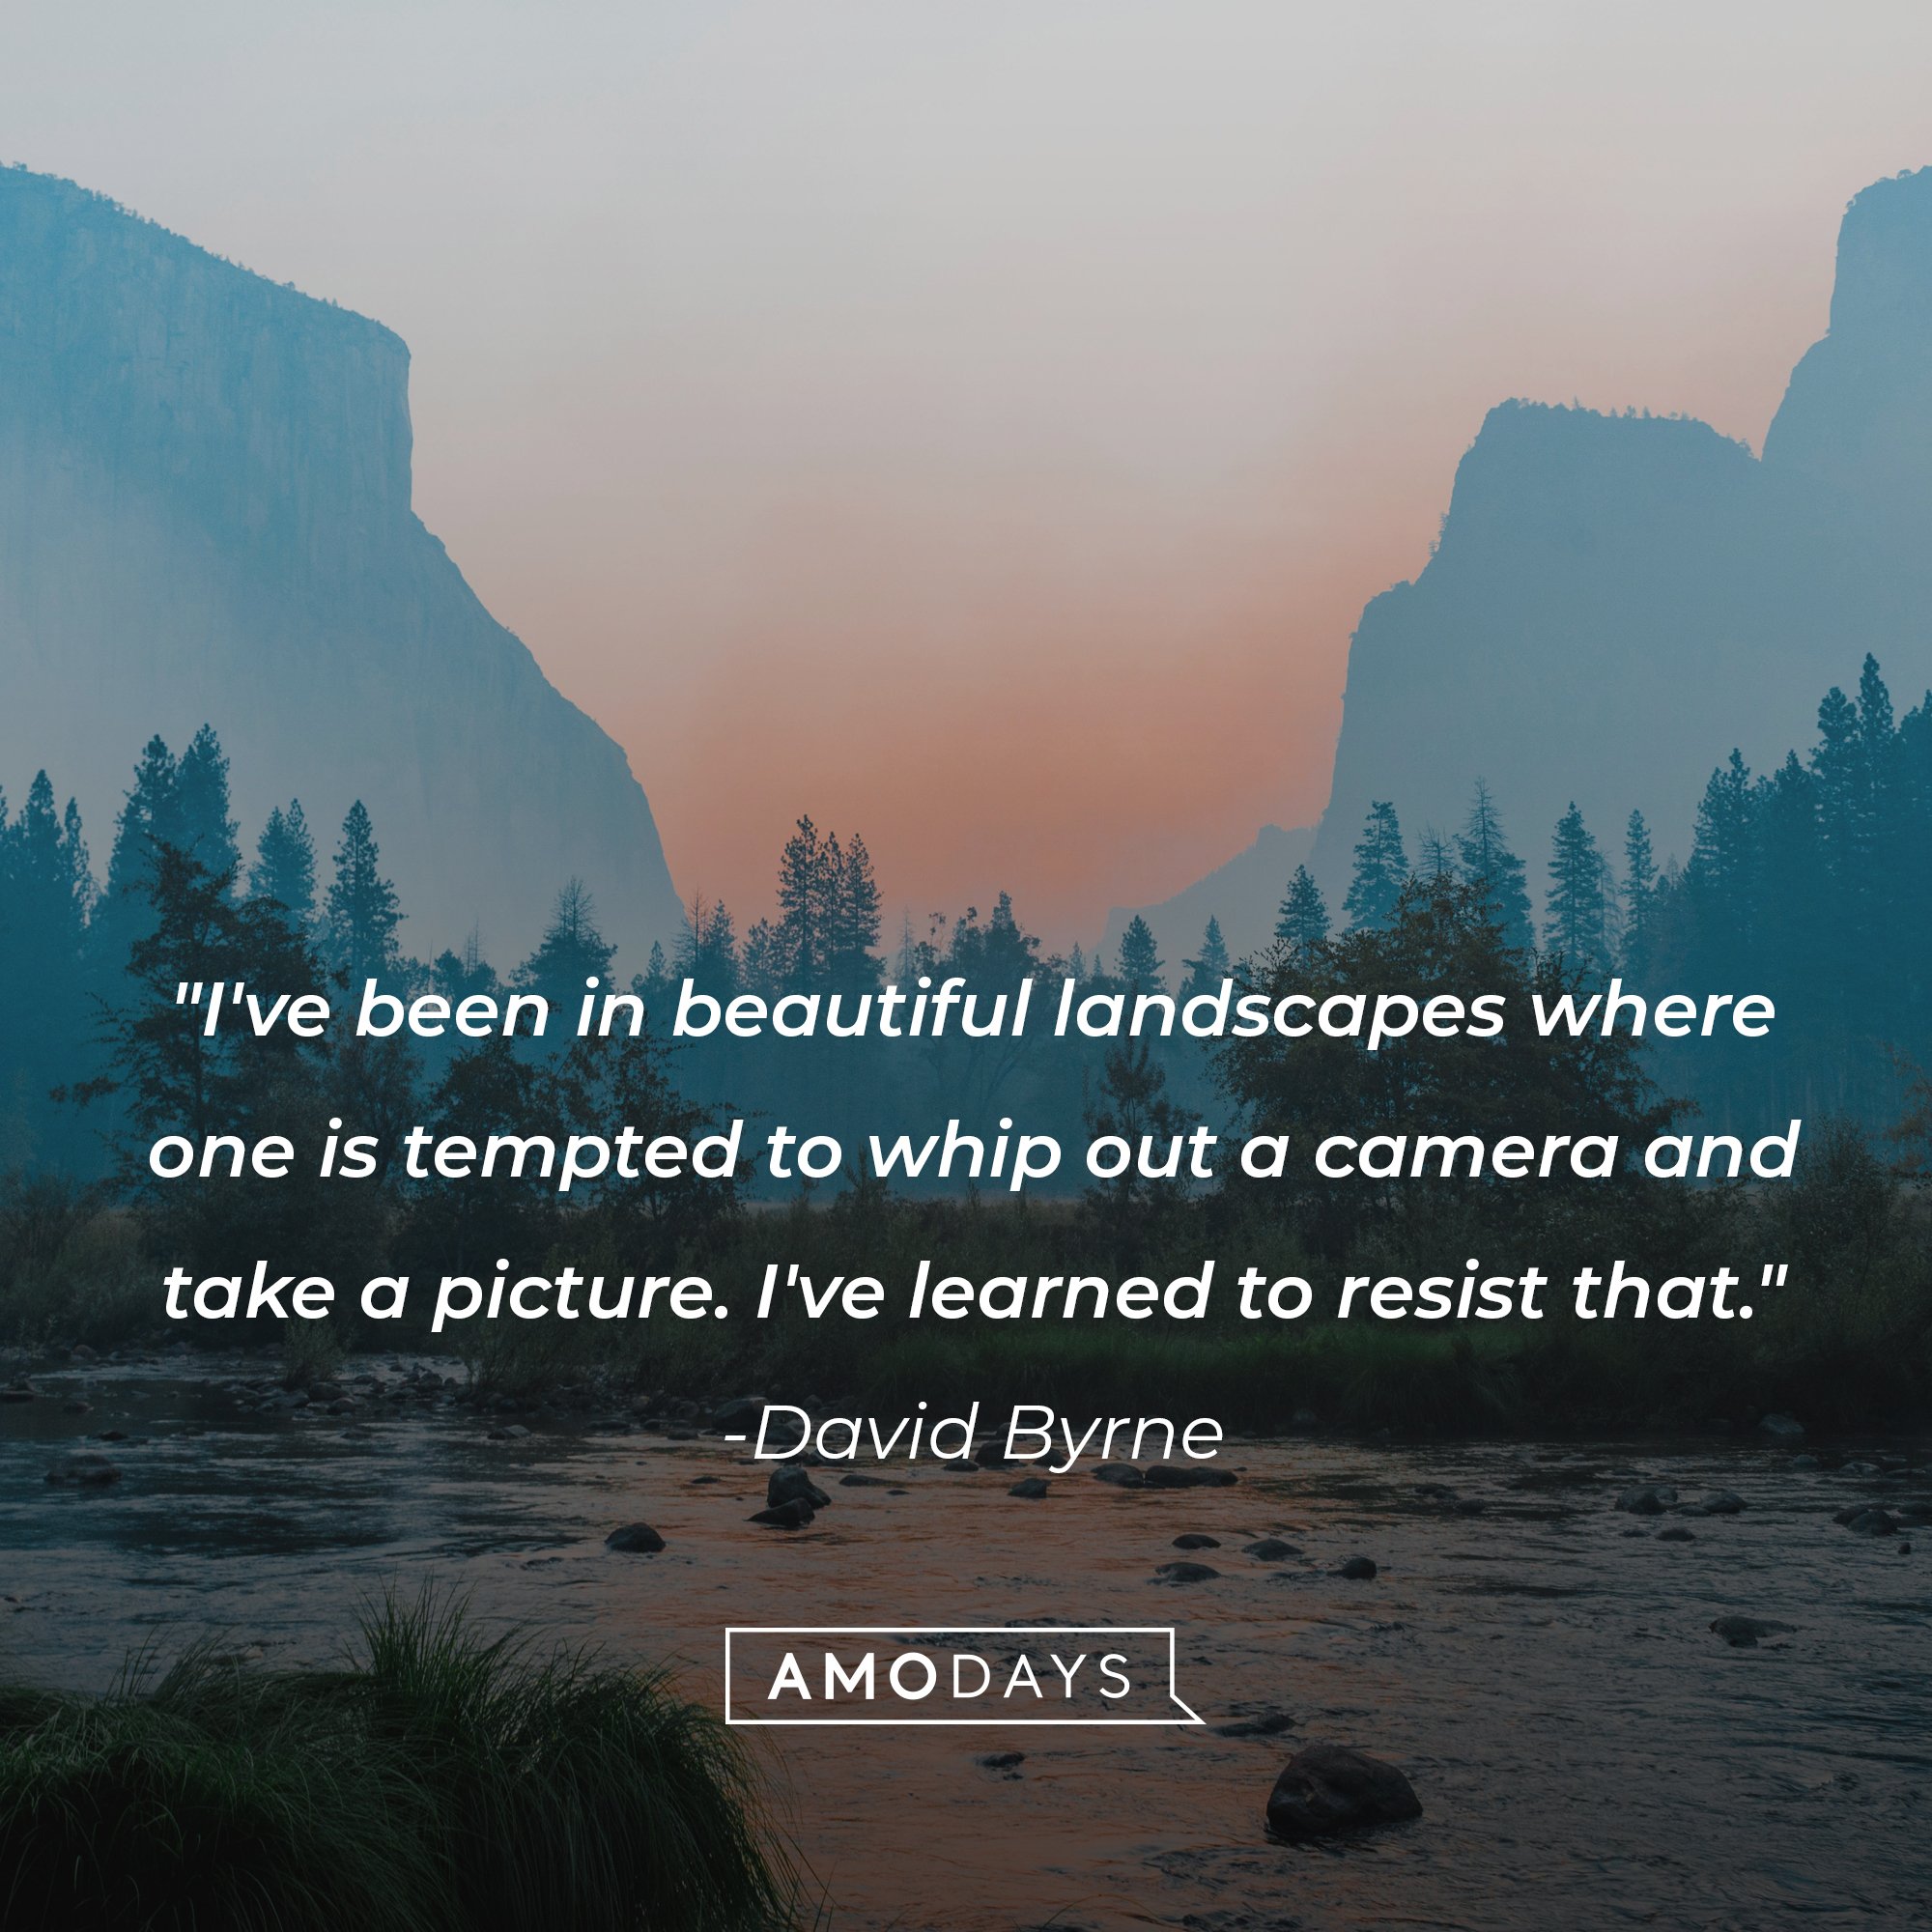 David Byrne's quote: "I've been in beautiful landscapes where one is tempted to whip out a camera and take a picture. I've learned to resist that." | Image: AmoDays